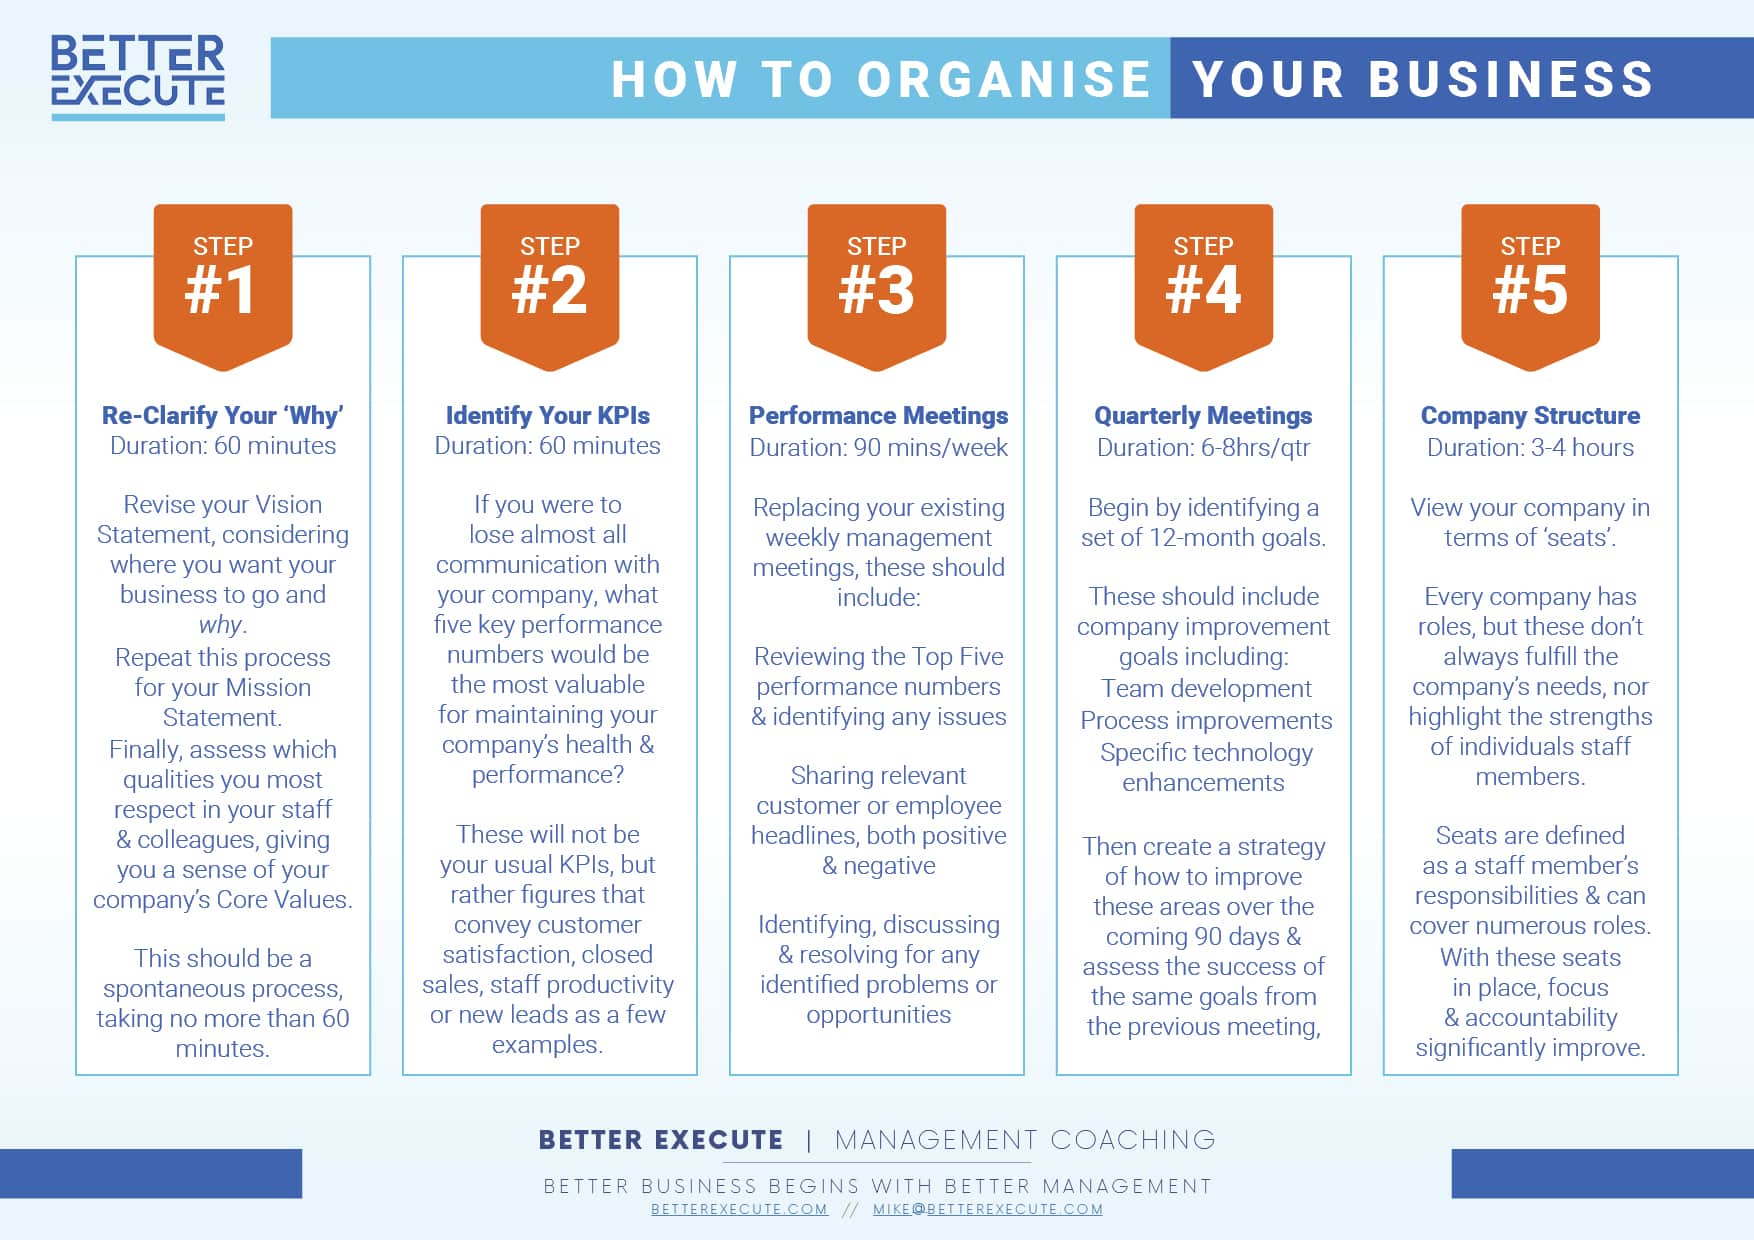 Organise Your Business